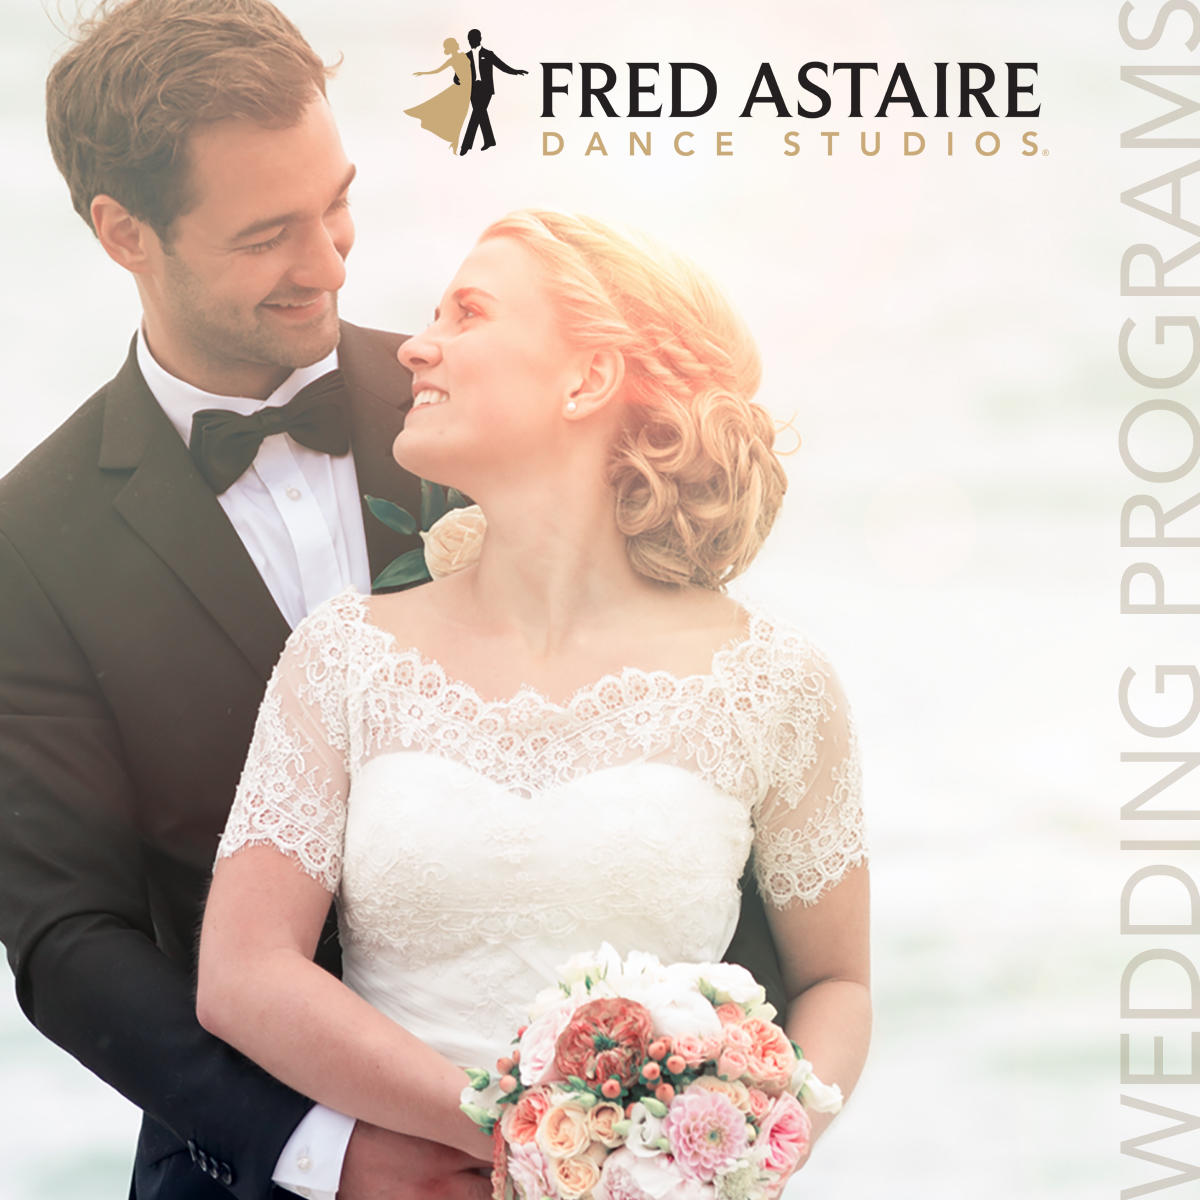 Are you getting married and looking to learn your first dance ? Then the Fred Astaire Dance Studios - Riverside is the place for you to learn! We teach in Private Dance Lessons, Group Dance Lessons and of course we have Parties for you to practice at! Call today to learn more! 401-415-9766